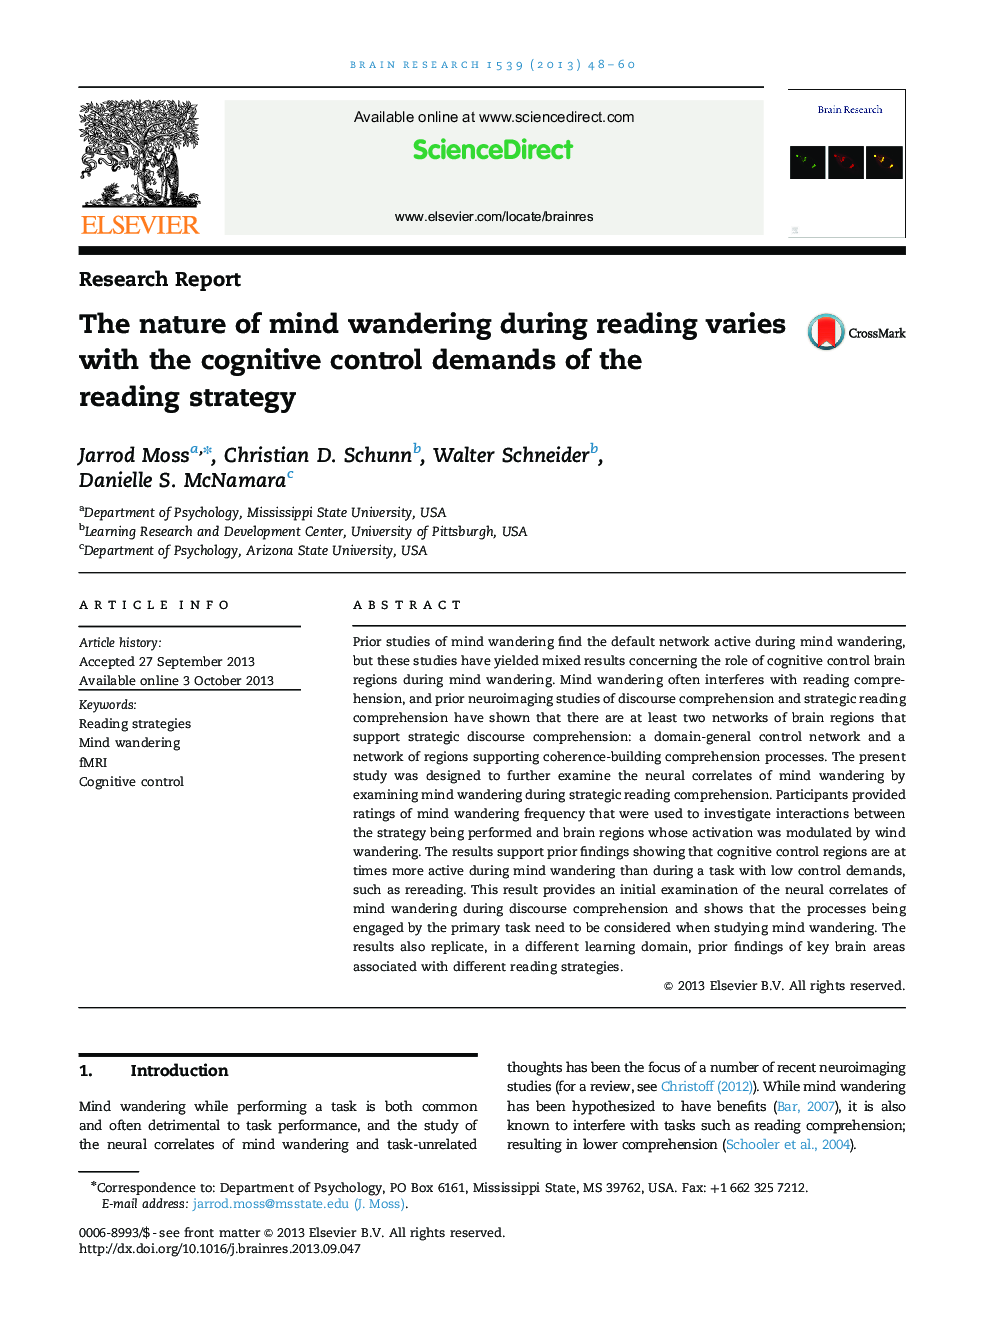 Research ReportThe nature of mind wandering during reading varies with the cognitive control demands of the reading strategy